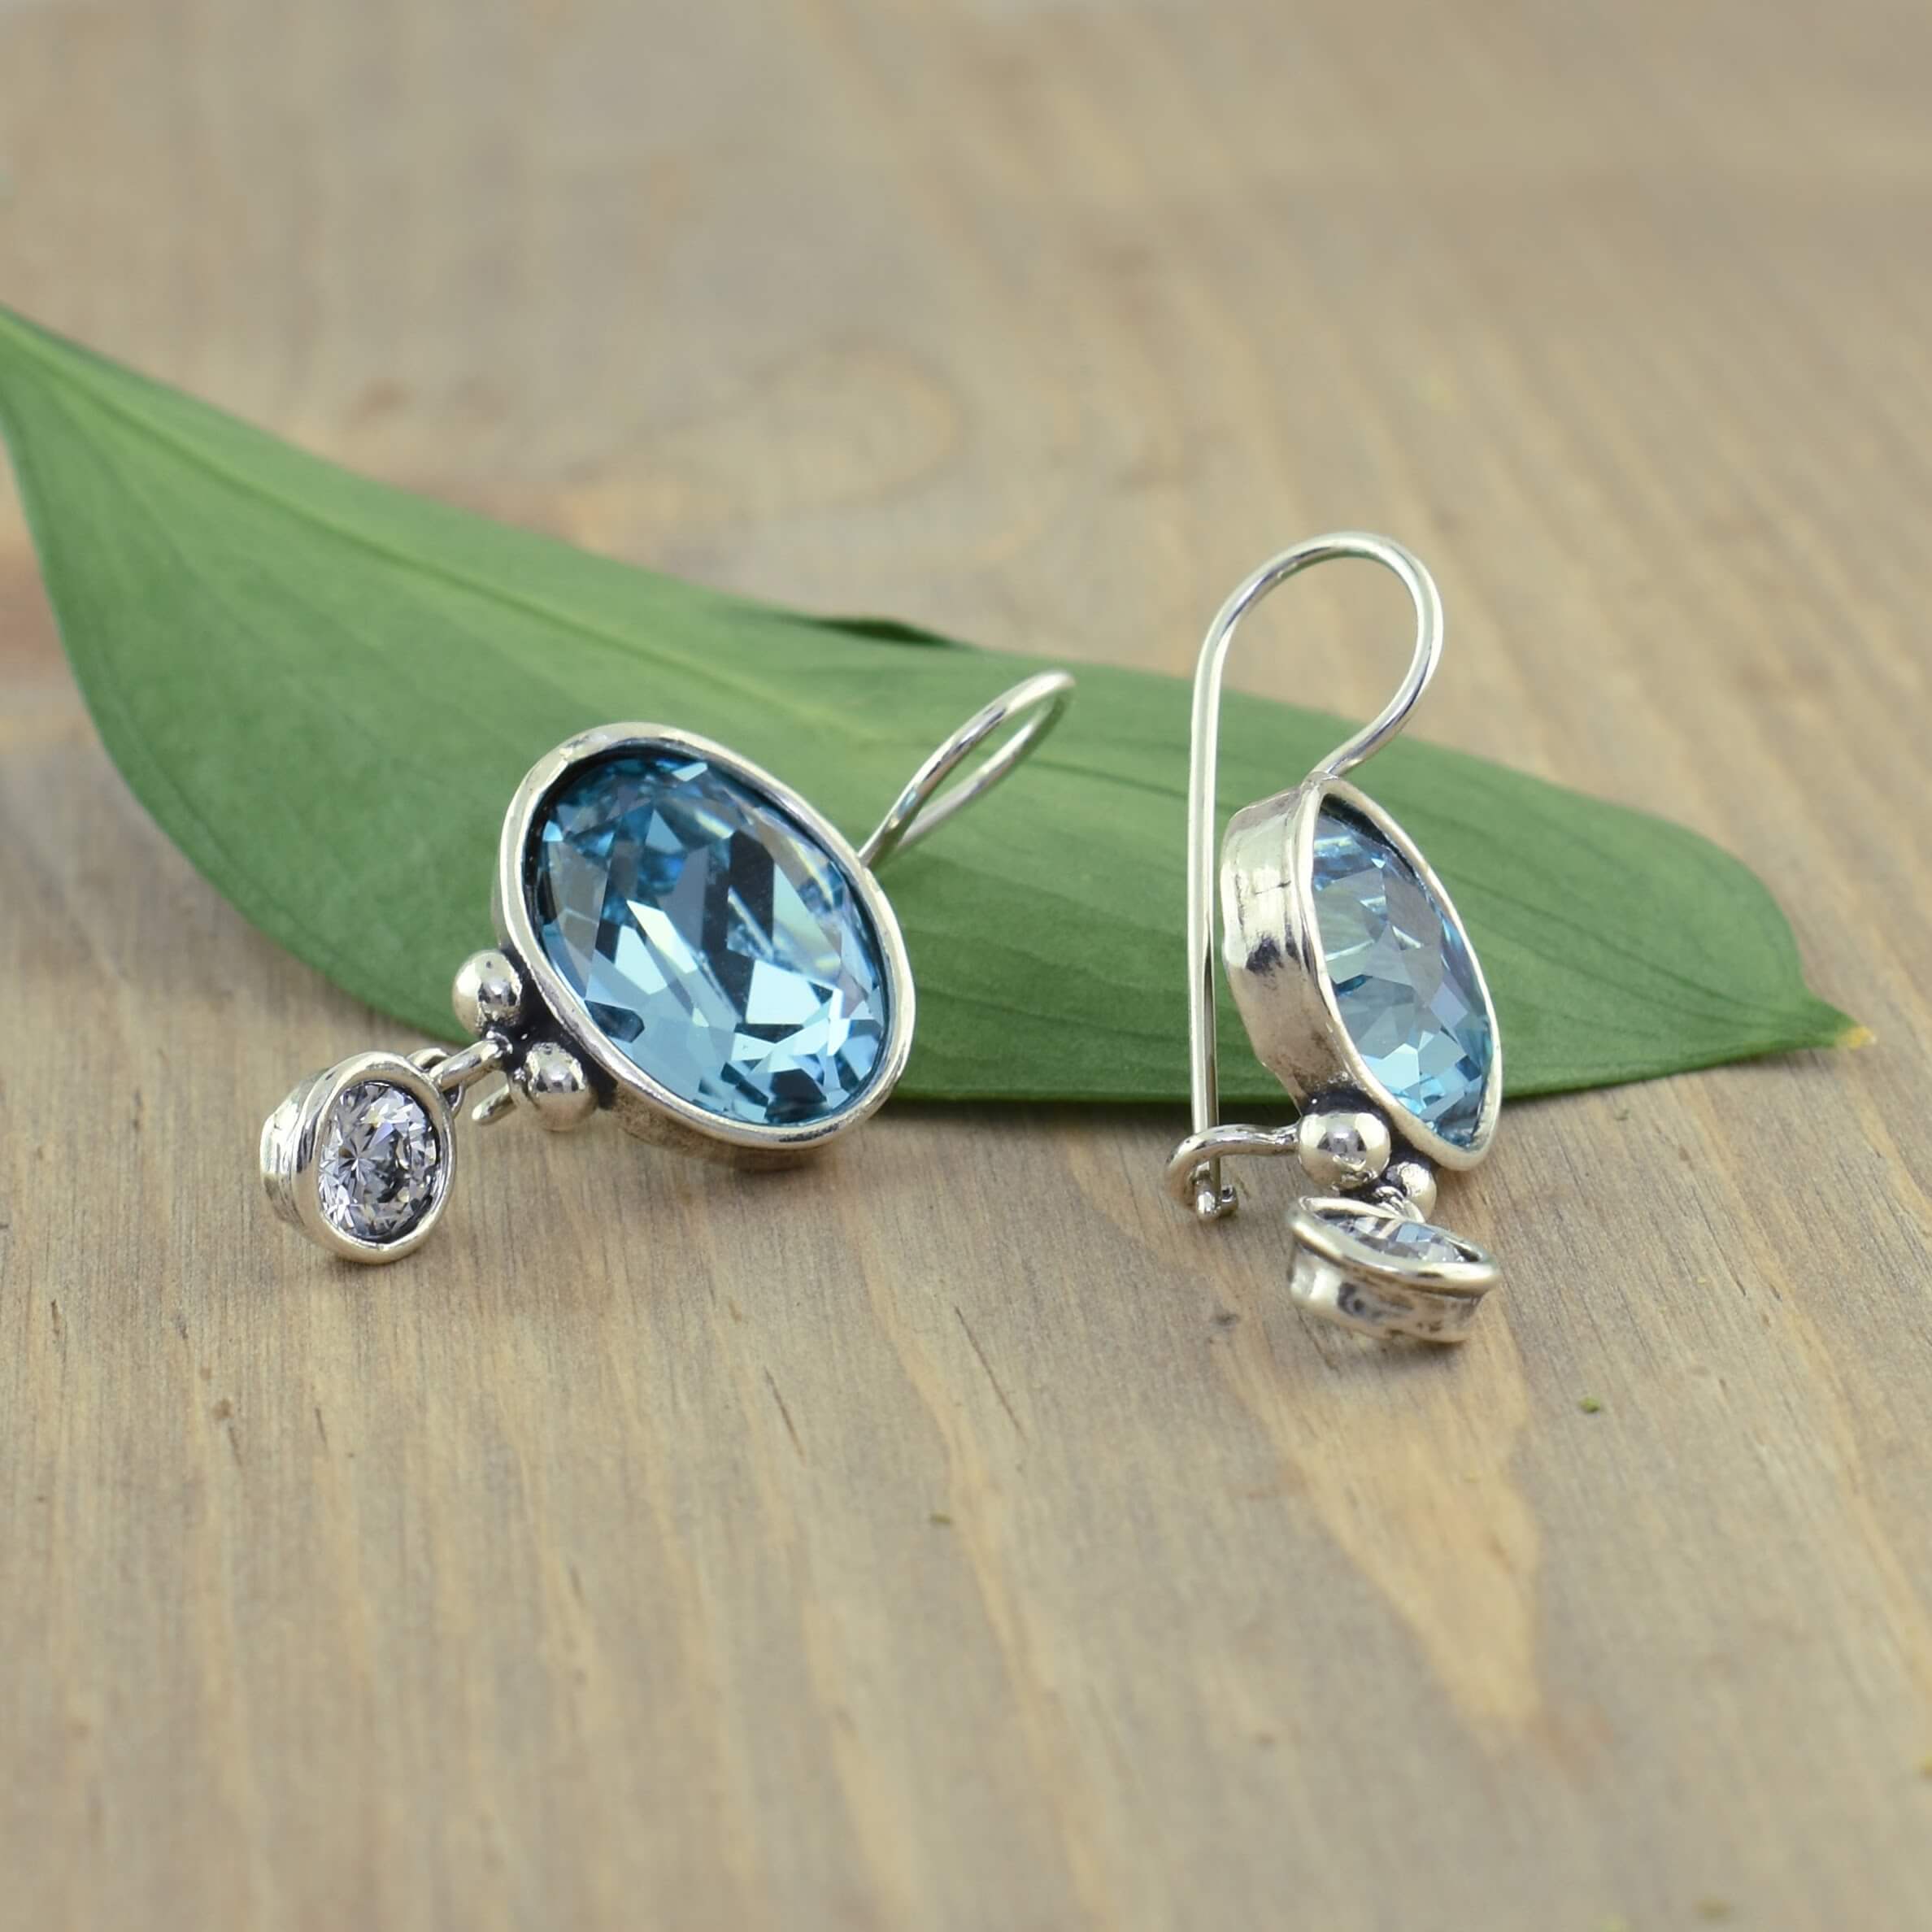 sterling silver earrings with sky blue and clear cz